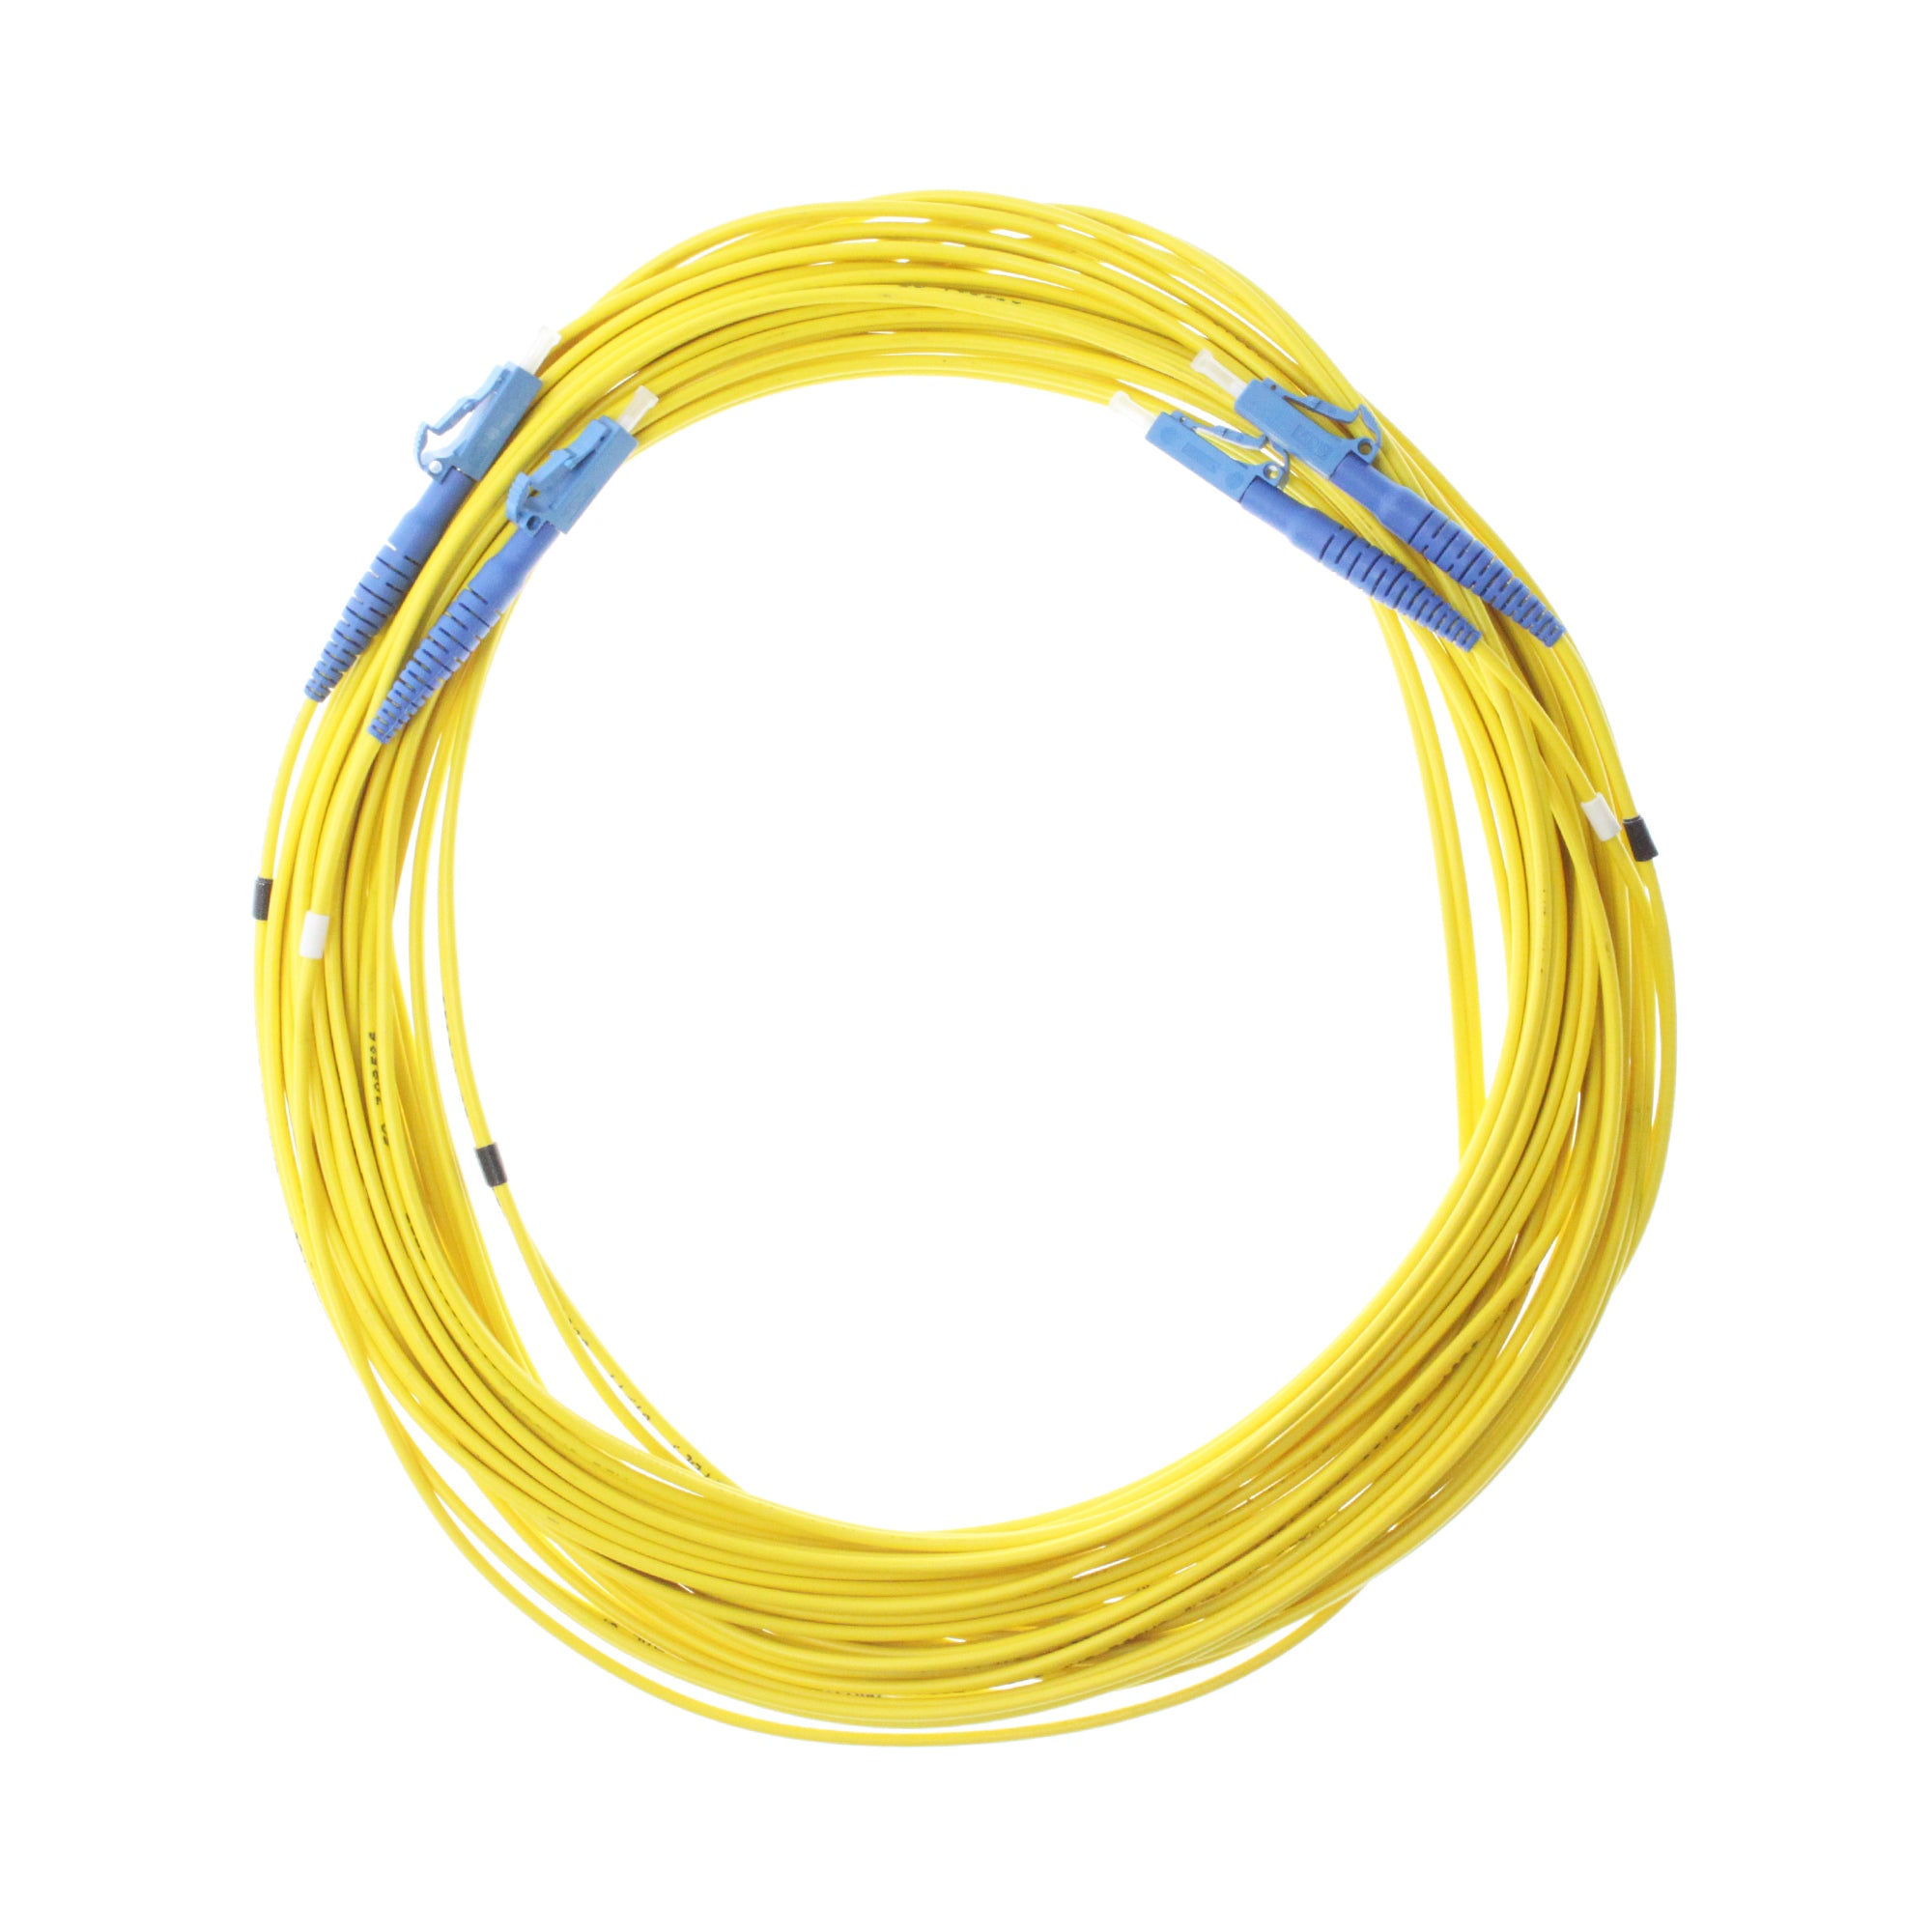 ADC TeleCommunications, ADC FPC2-SPLC-10M SINGLE MODE LC-LC DUPLEX FIBER OPTIC PATCH CORD CABLE